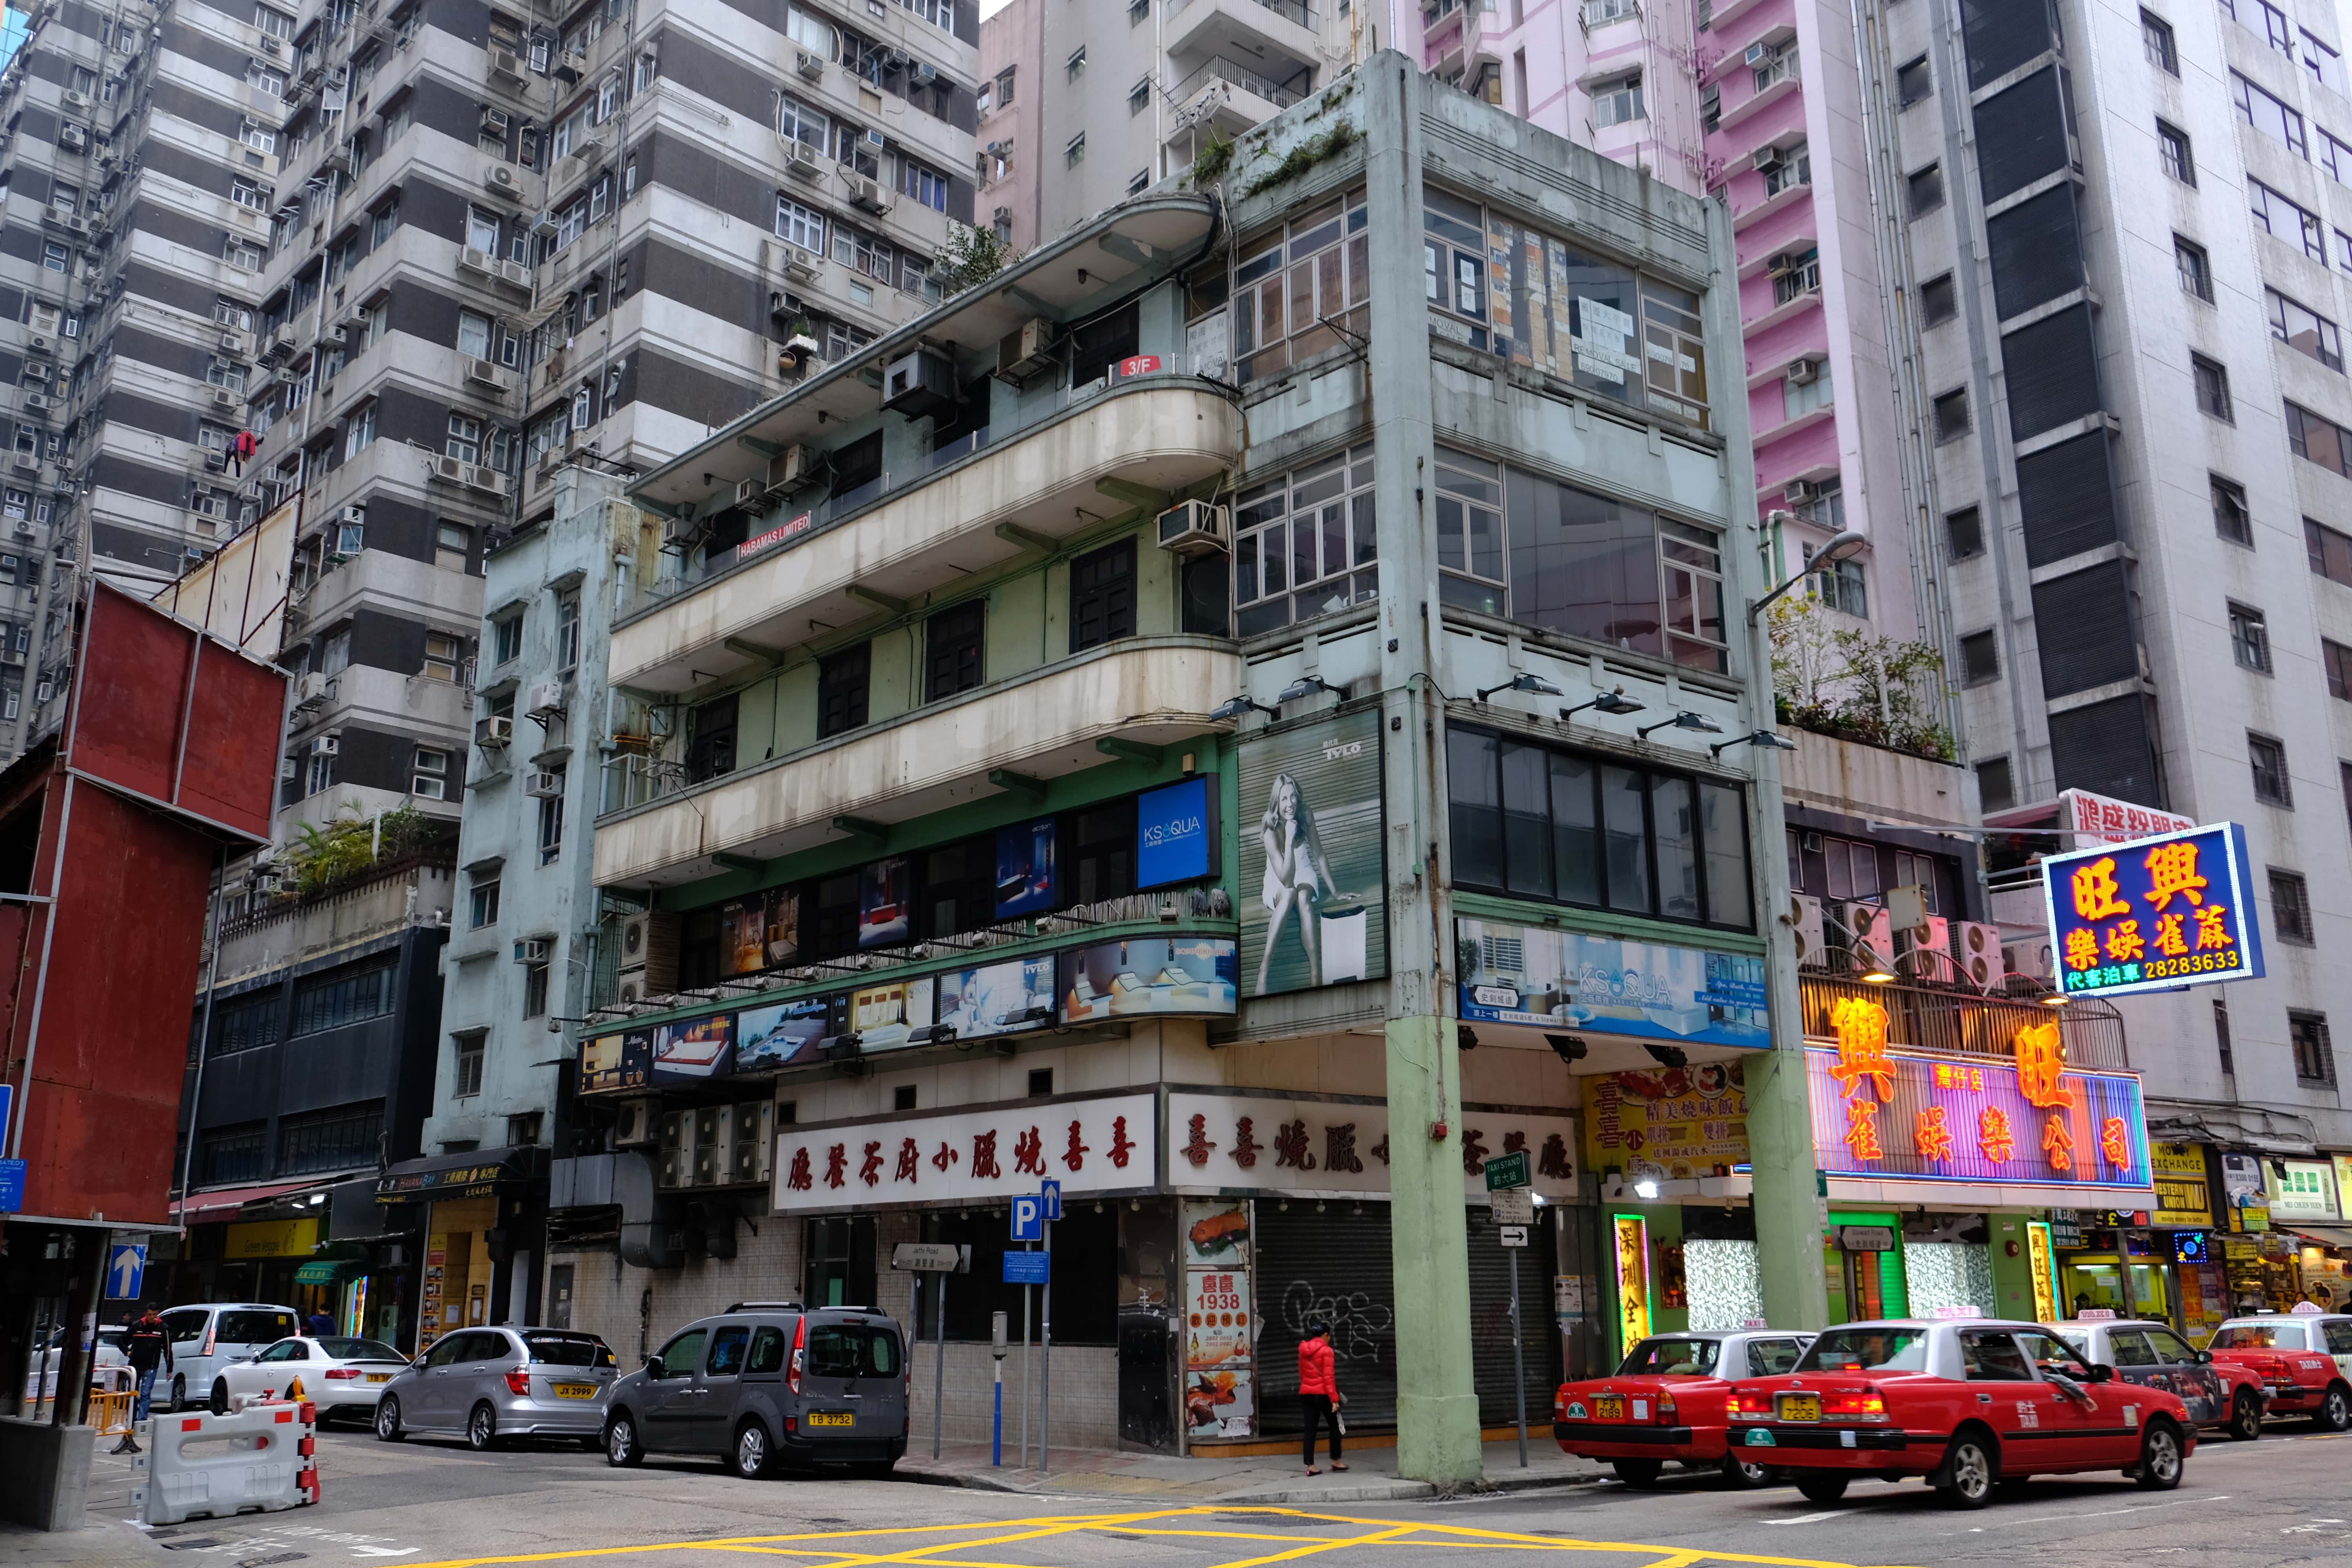 The “Disappearing” Buildings in Hong Kong (III) -- The Last Corner